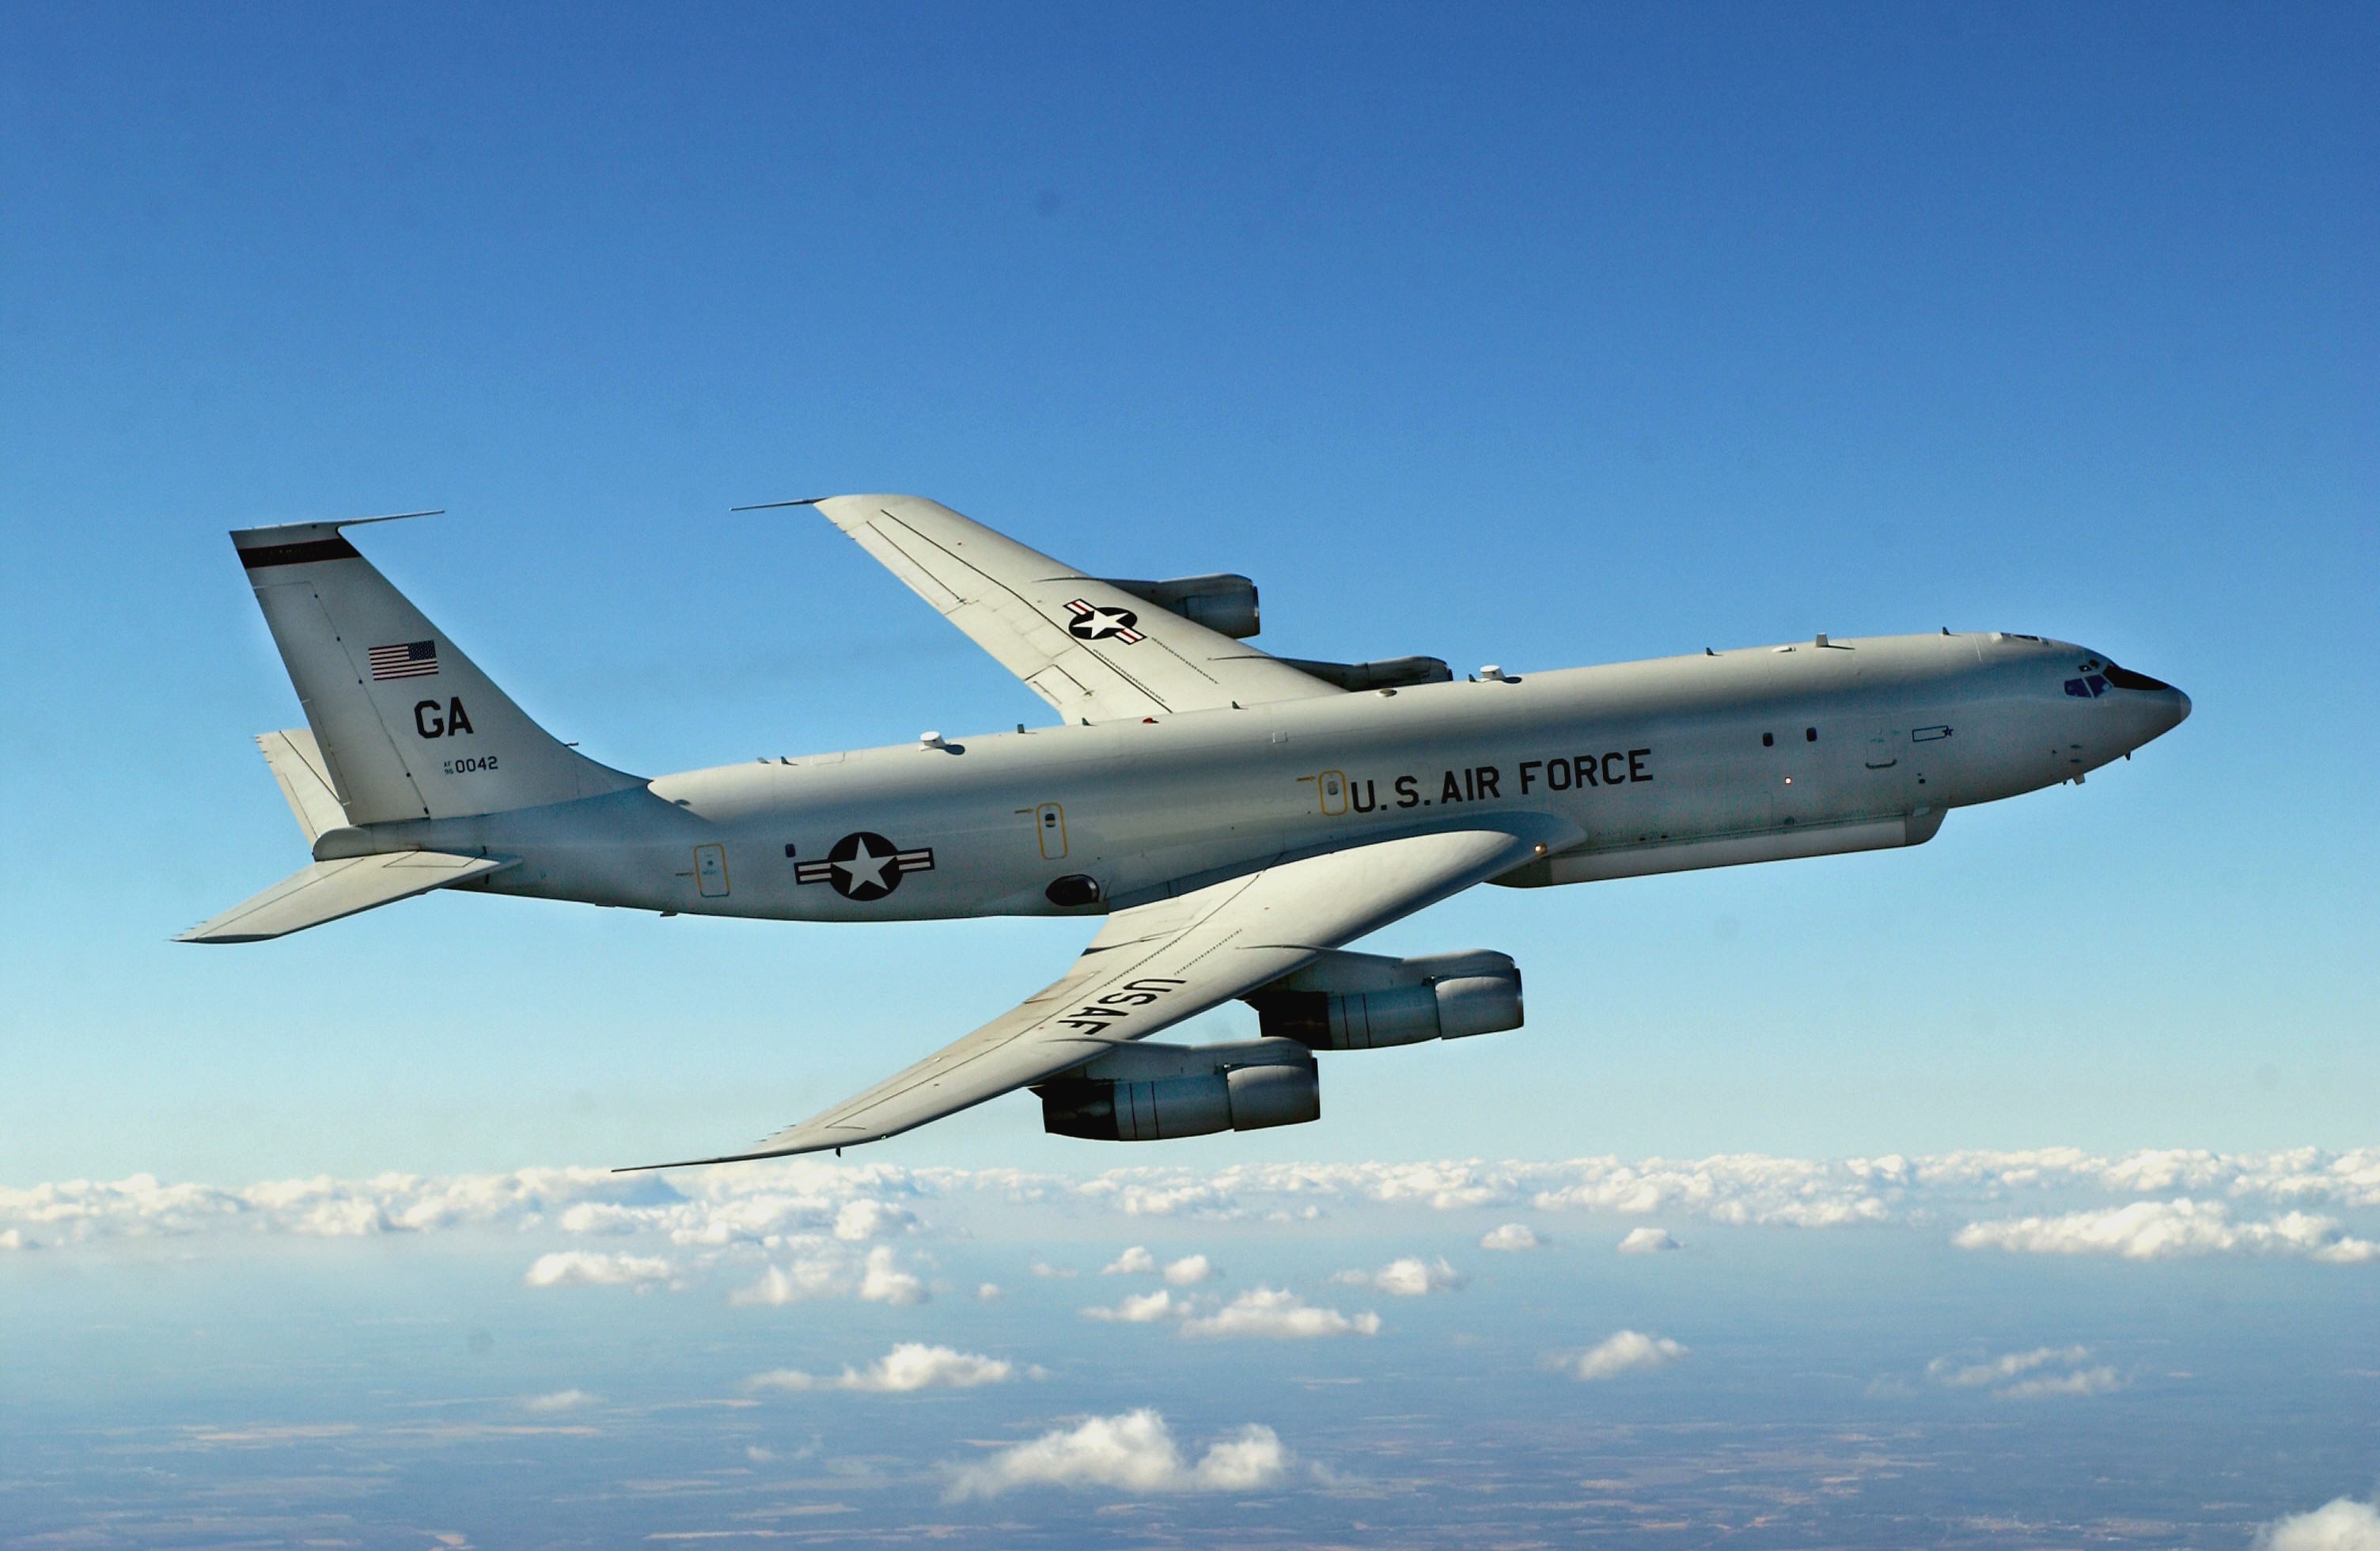 17th E-8C Joint Surveillance Target Attack Radar System (Joint STARS) aircraft